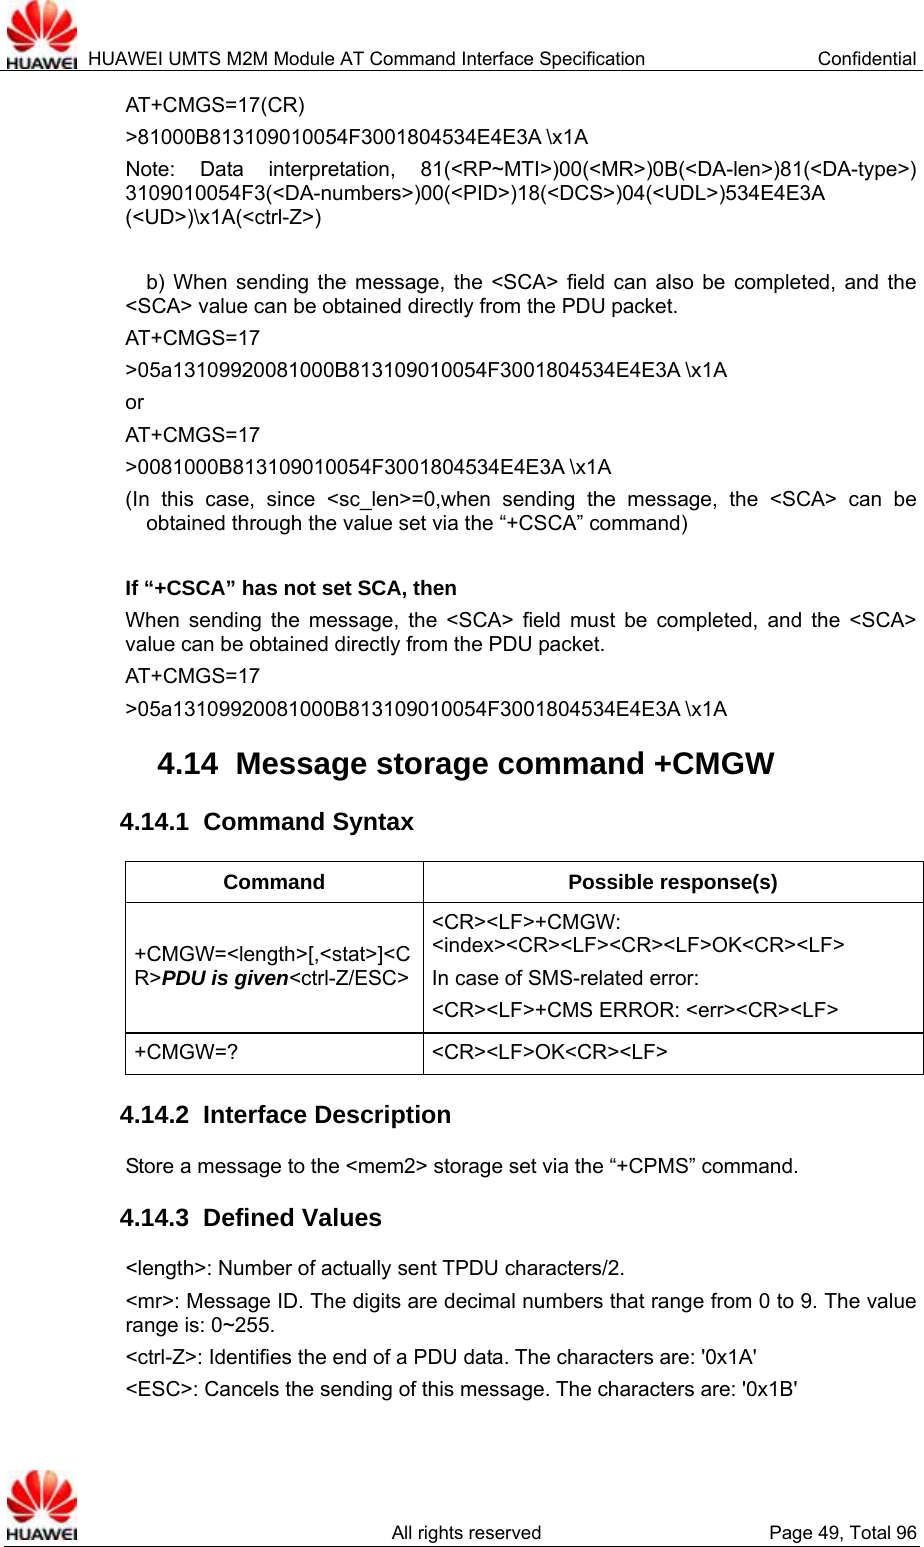  HUAWEI UMTS M2M Module AT Command Interface Specification  Confidential   All rights reserved  Page 49, Total 96 AT+CMGS=17(CR) &gt;81000B813109010054F3001804534E4E3A \x1A Note: Data interpretation, 81(&lt;RP~MTI&gt;)00(&lt;MR&gt;)0B(&lt;DA-len&gt;)81(&lt;DA-type&gt;) 3109010054F3(&lt;DA-numbers&gt;)00(&lt;PID&gt;)18(&lt;DCS&gt;)04(&lt;UDL&gt;)534E4E3A (&lt;UD&gt;)\x1A(&lt;ctrl-Z&gt;)  b) When sending the message, the &lt;SCA&gt; field can also be completed, and the &lt;SCA&gt; value can be obtained directly from the PDU packet.   AT+CMGS=17 &gt;05a13109920081000B813109010054F3001804534E4E3A \x1A or AT+CMGS=17 &gt;0081000B813109010054F3001804534E4E3A \x1A   (In this case, since &lt;sc_len&gt;=0,when sending the message, the &lt;SCA&gt; can be obtained through the value set via the “+CSCA” command)  If “+CSCA” has not set SCA, then When sending the message, the &lt;SCA&gt; field must be completed, and the &lt;SCA&gt; value can be obtained directly from the PDU packet.   AT+CMGS=17 &gt;05a13109920081000B813109010054F3001804534E4E3A \x1A   4.14  Message storage command +CMGW 4.14.1  Command Syntax Command Possible response(s) +CMGW=&lt;length&gt;[,&lt;stat&gt;]&lt;CR&gt;PDU is given&lt;ctrl-Z/ESC&gt;&lt;CR&gt;&lt;LF&gt;+CMGW: &lt;index&gt;&lt;CR&gt;&lt;LF&gt;&lt;CR&gt;&lt;LF&gt;OK&lt;CR&gt;&lt;LF&gt; In case of SMS-related error:   &lt;CR&gt;&lt;LF&gt;+CMS ERROR: &lt;err&gt;&lt;CR&gt;&lt;LF&gt; +CMGW=? &lt;CR&gt;&lt;LF&gt;OK&lt;CR&gt;&lt;LF&gt; 4.14.2  Interface Description Store a message to the &lt;mem2&gt; storage set via the “+CPMS” command.   4.14.3  Defined Values &lt;length&gt;: Number of actually sent TPDU characters/2. &lt;mr&gt;: Message ID. The digits are decimal numbers that range from 0 to 9. The value range is: 0~255. &lt;ctrl-Z&gt;: Identifies the end of a PDU data. The characters are: &apos;0x1A&apos; &lt;ESC&gt;: Cancels the sending of this message. The characters are: &apos;0x1B&apos; 